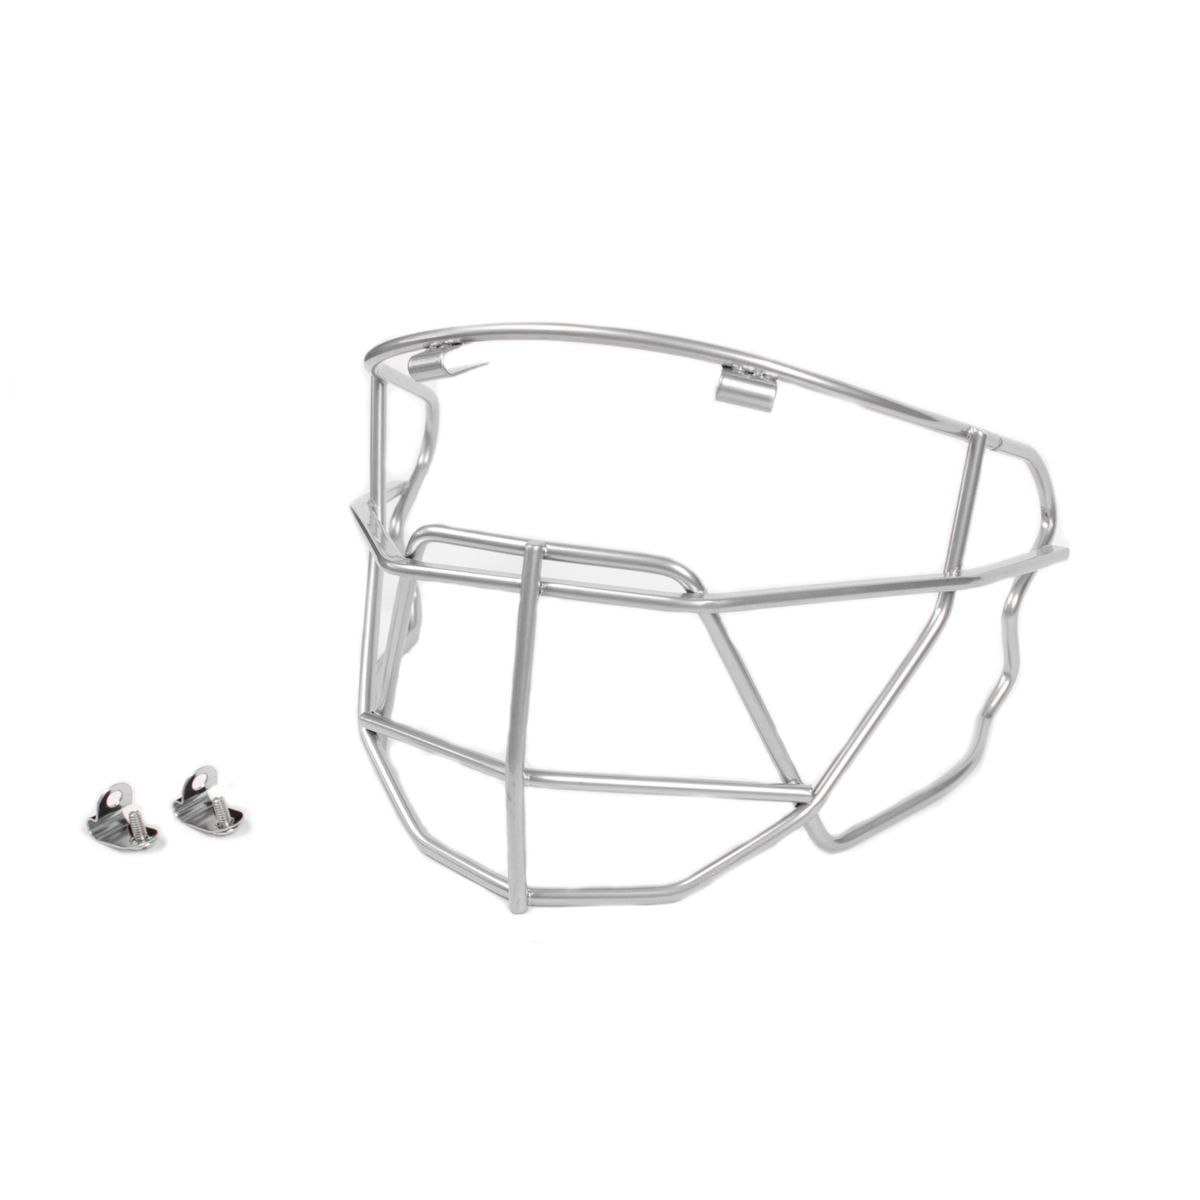 Rawlings Batter's Helmet Solid Wire Face Guard ABCRWG Baseball Softball NOCSAE 